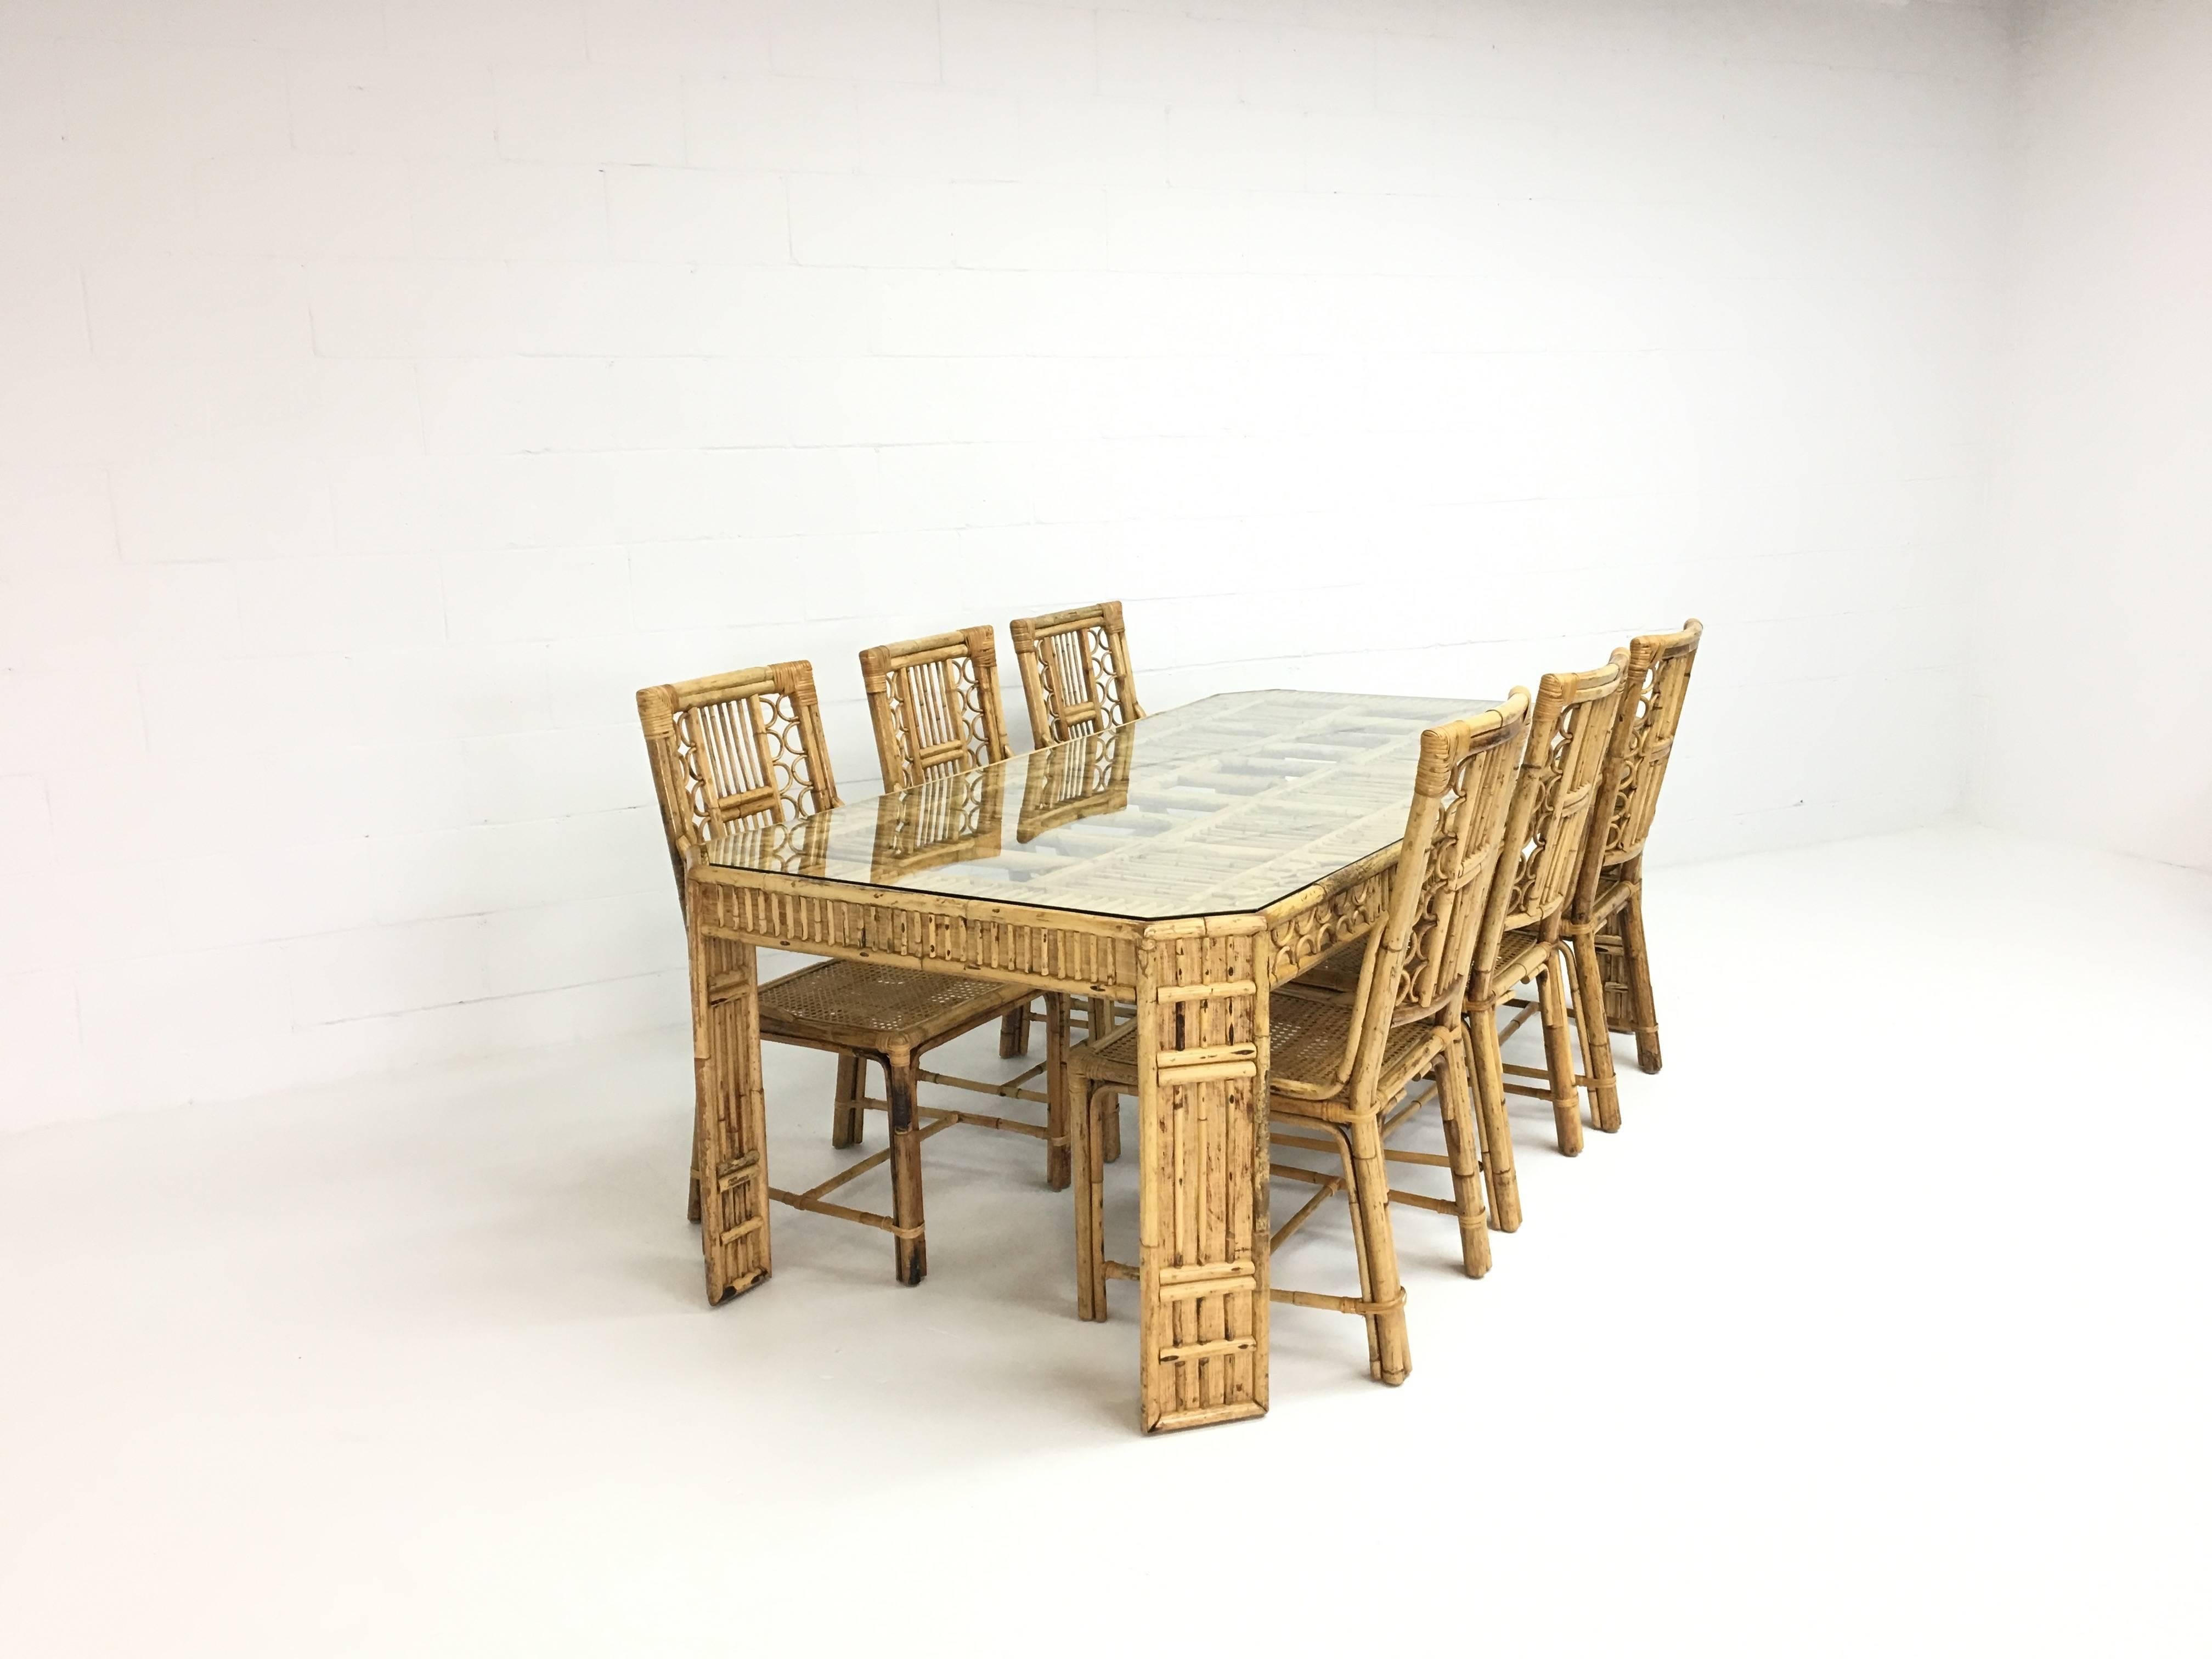 bamboo dining table